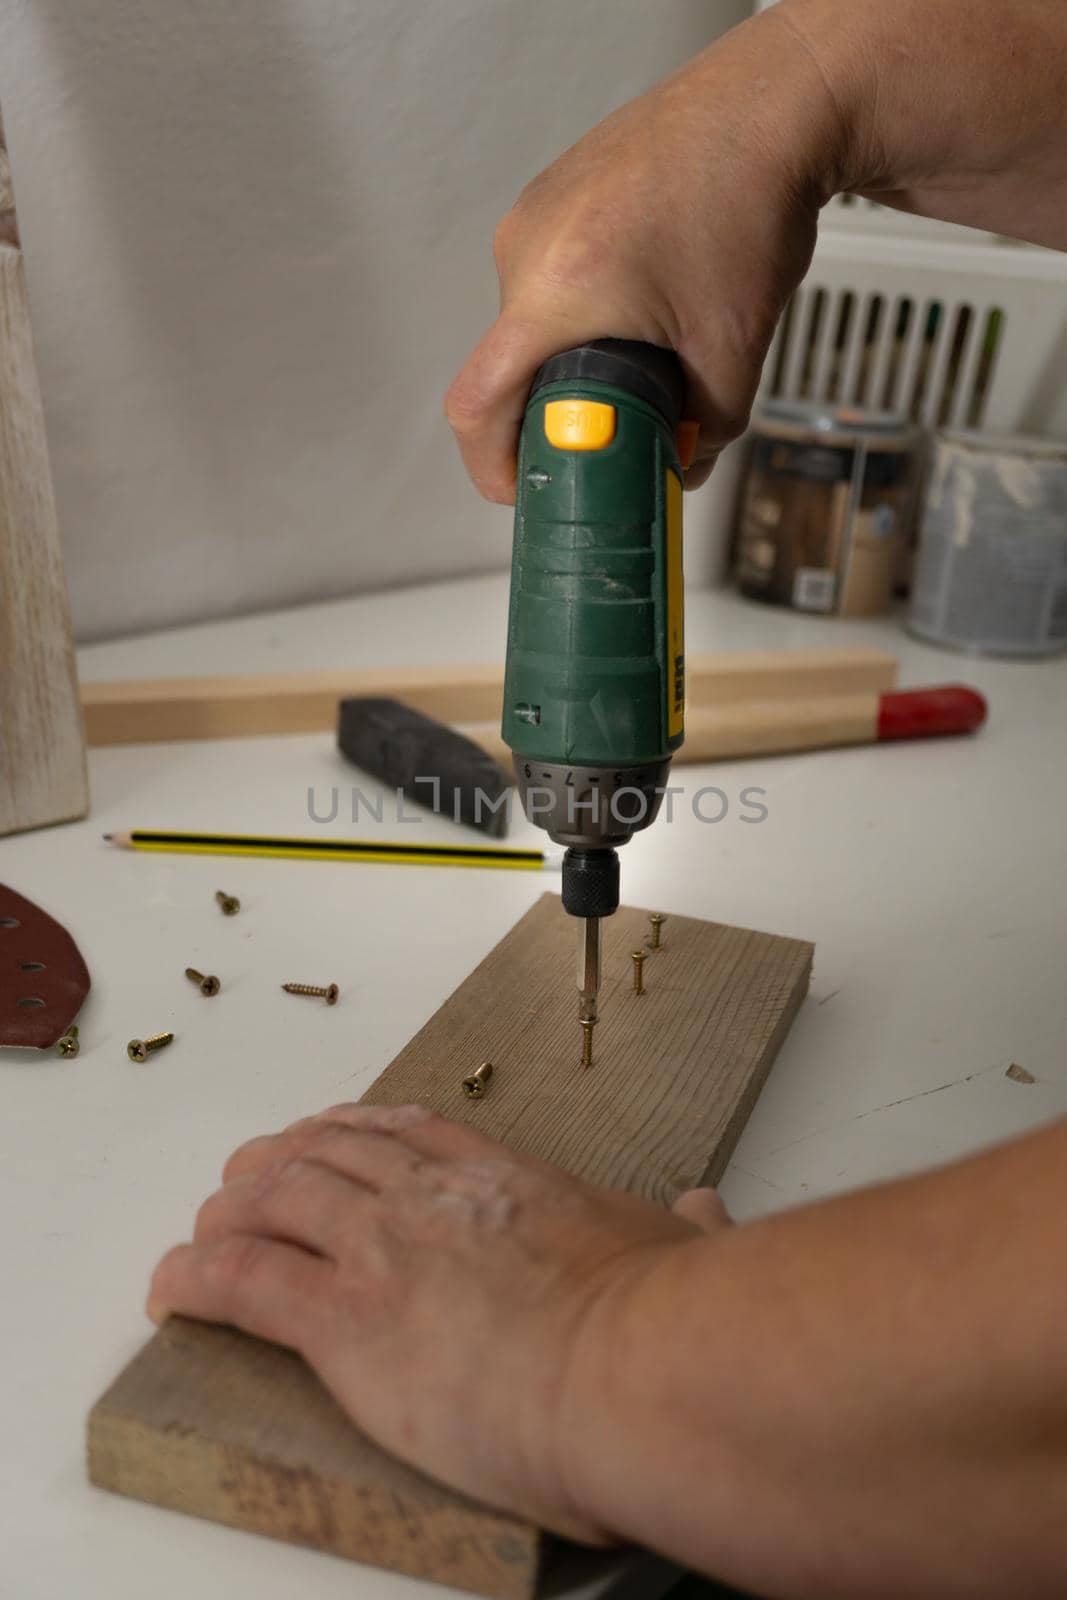 hands with electric screwdriver screwing screws into wood